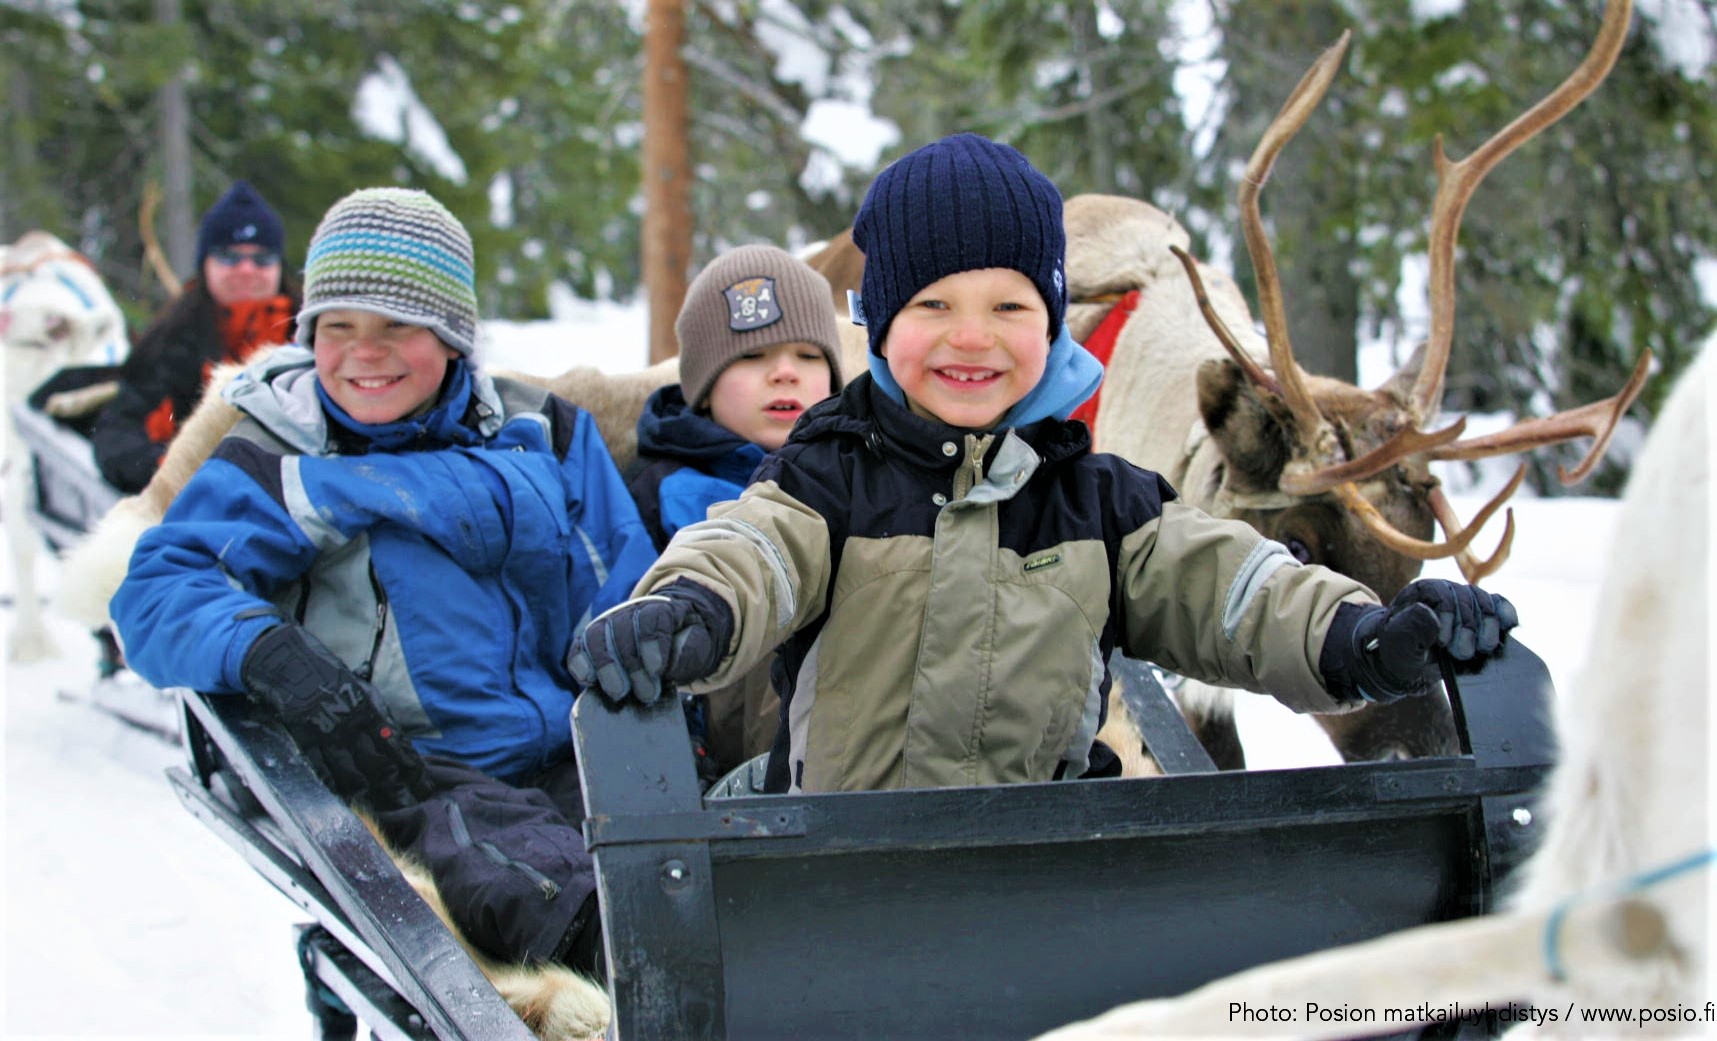 Kids excited to take a reindeer sleigh ride in Posio